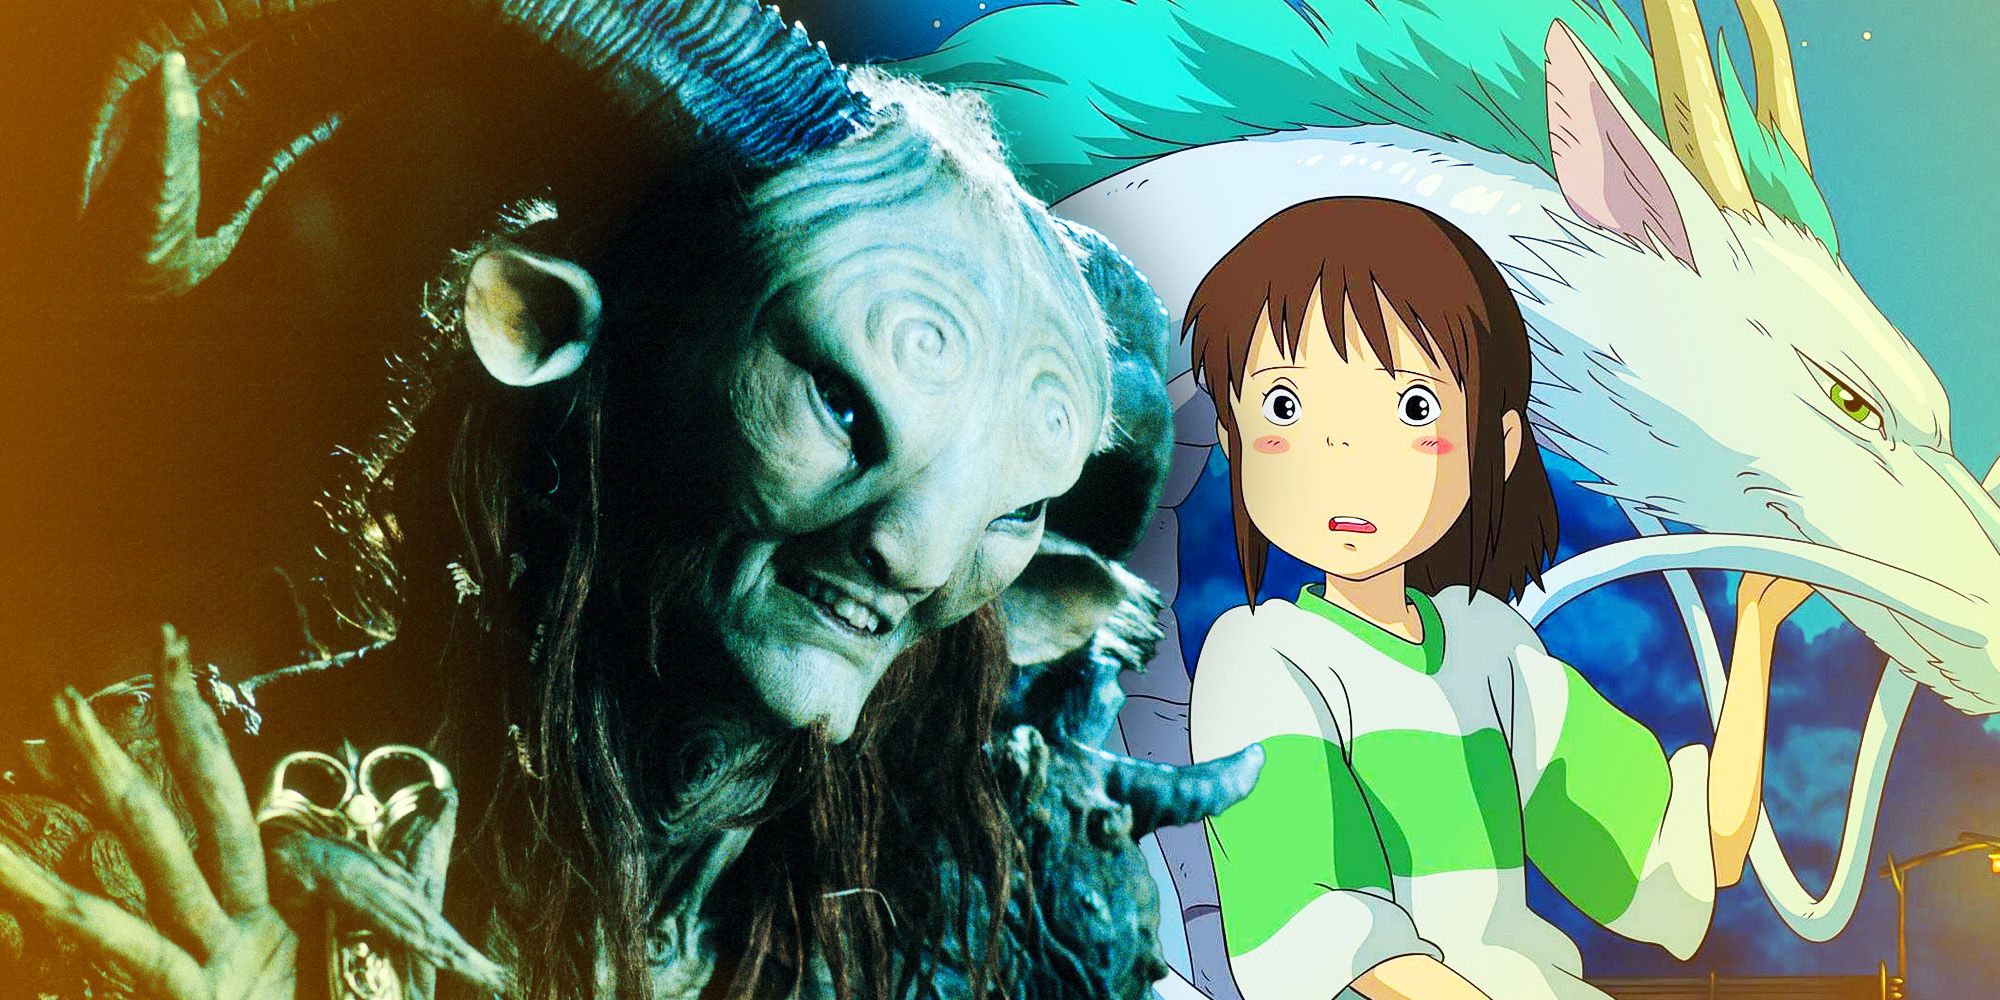 A collage featuring The Faun from Pan's Labyrinth and Chihiro Ogino and the dragon from Spirited Away